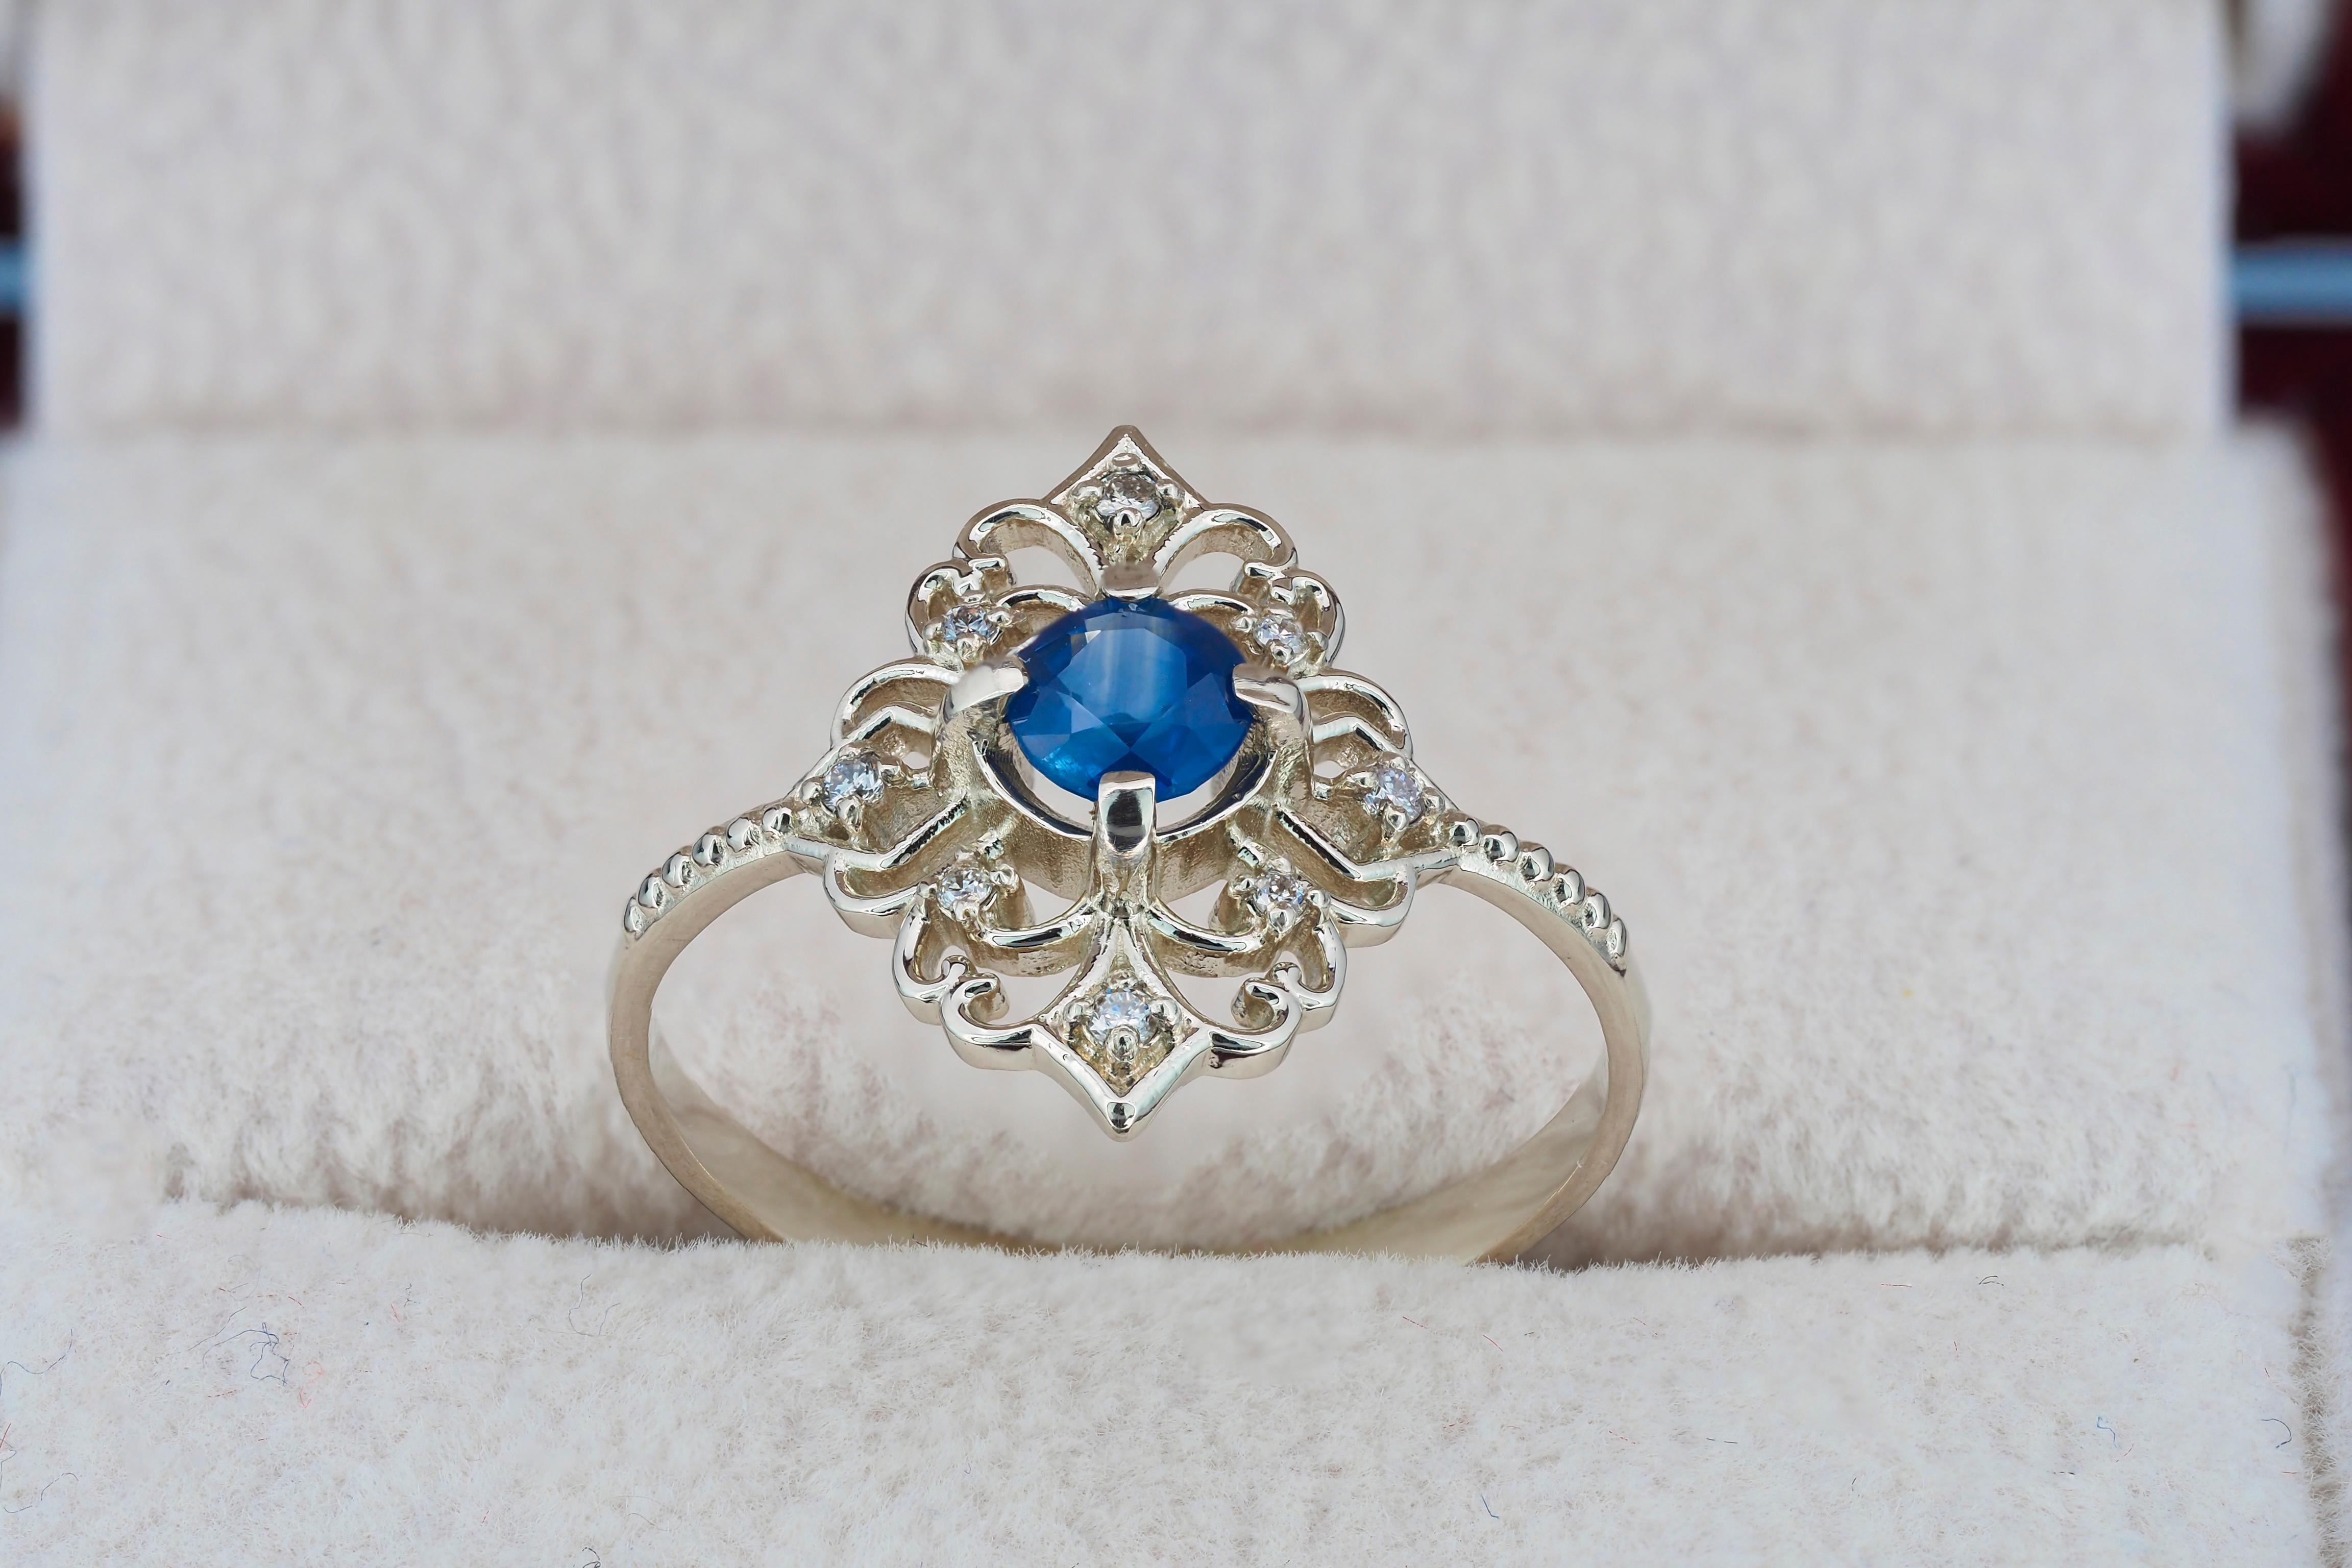 For Sale:  14k Gold Ring with Sapphire and Diamonds 5